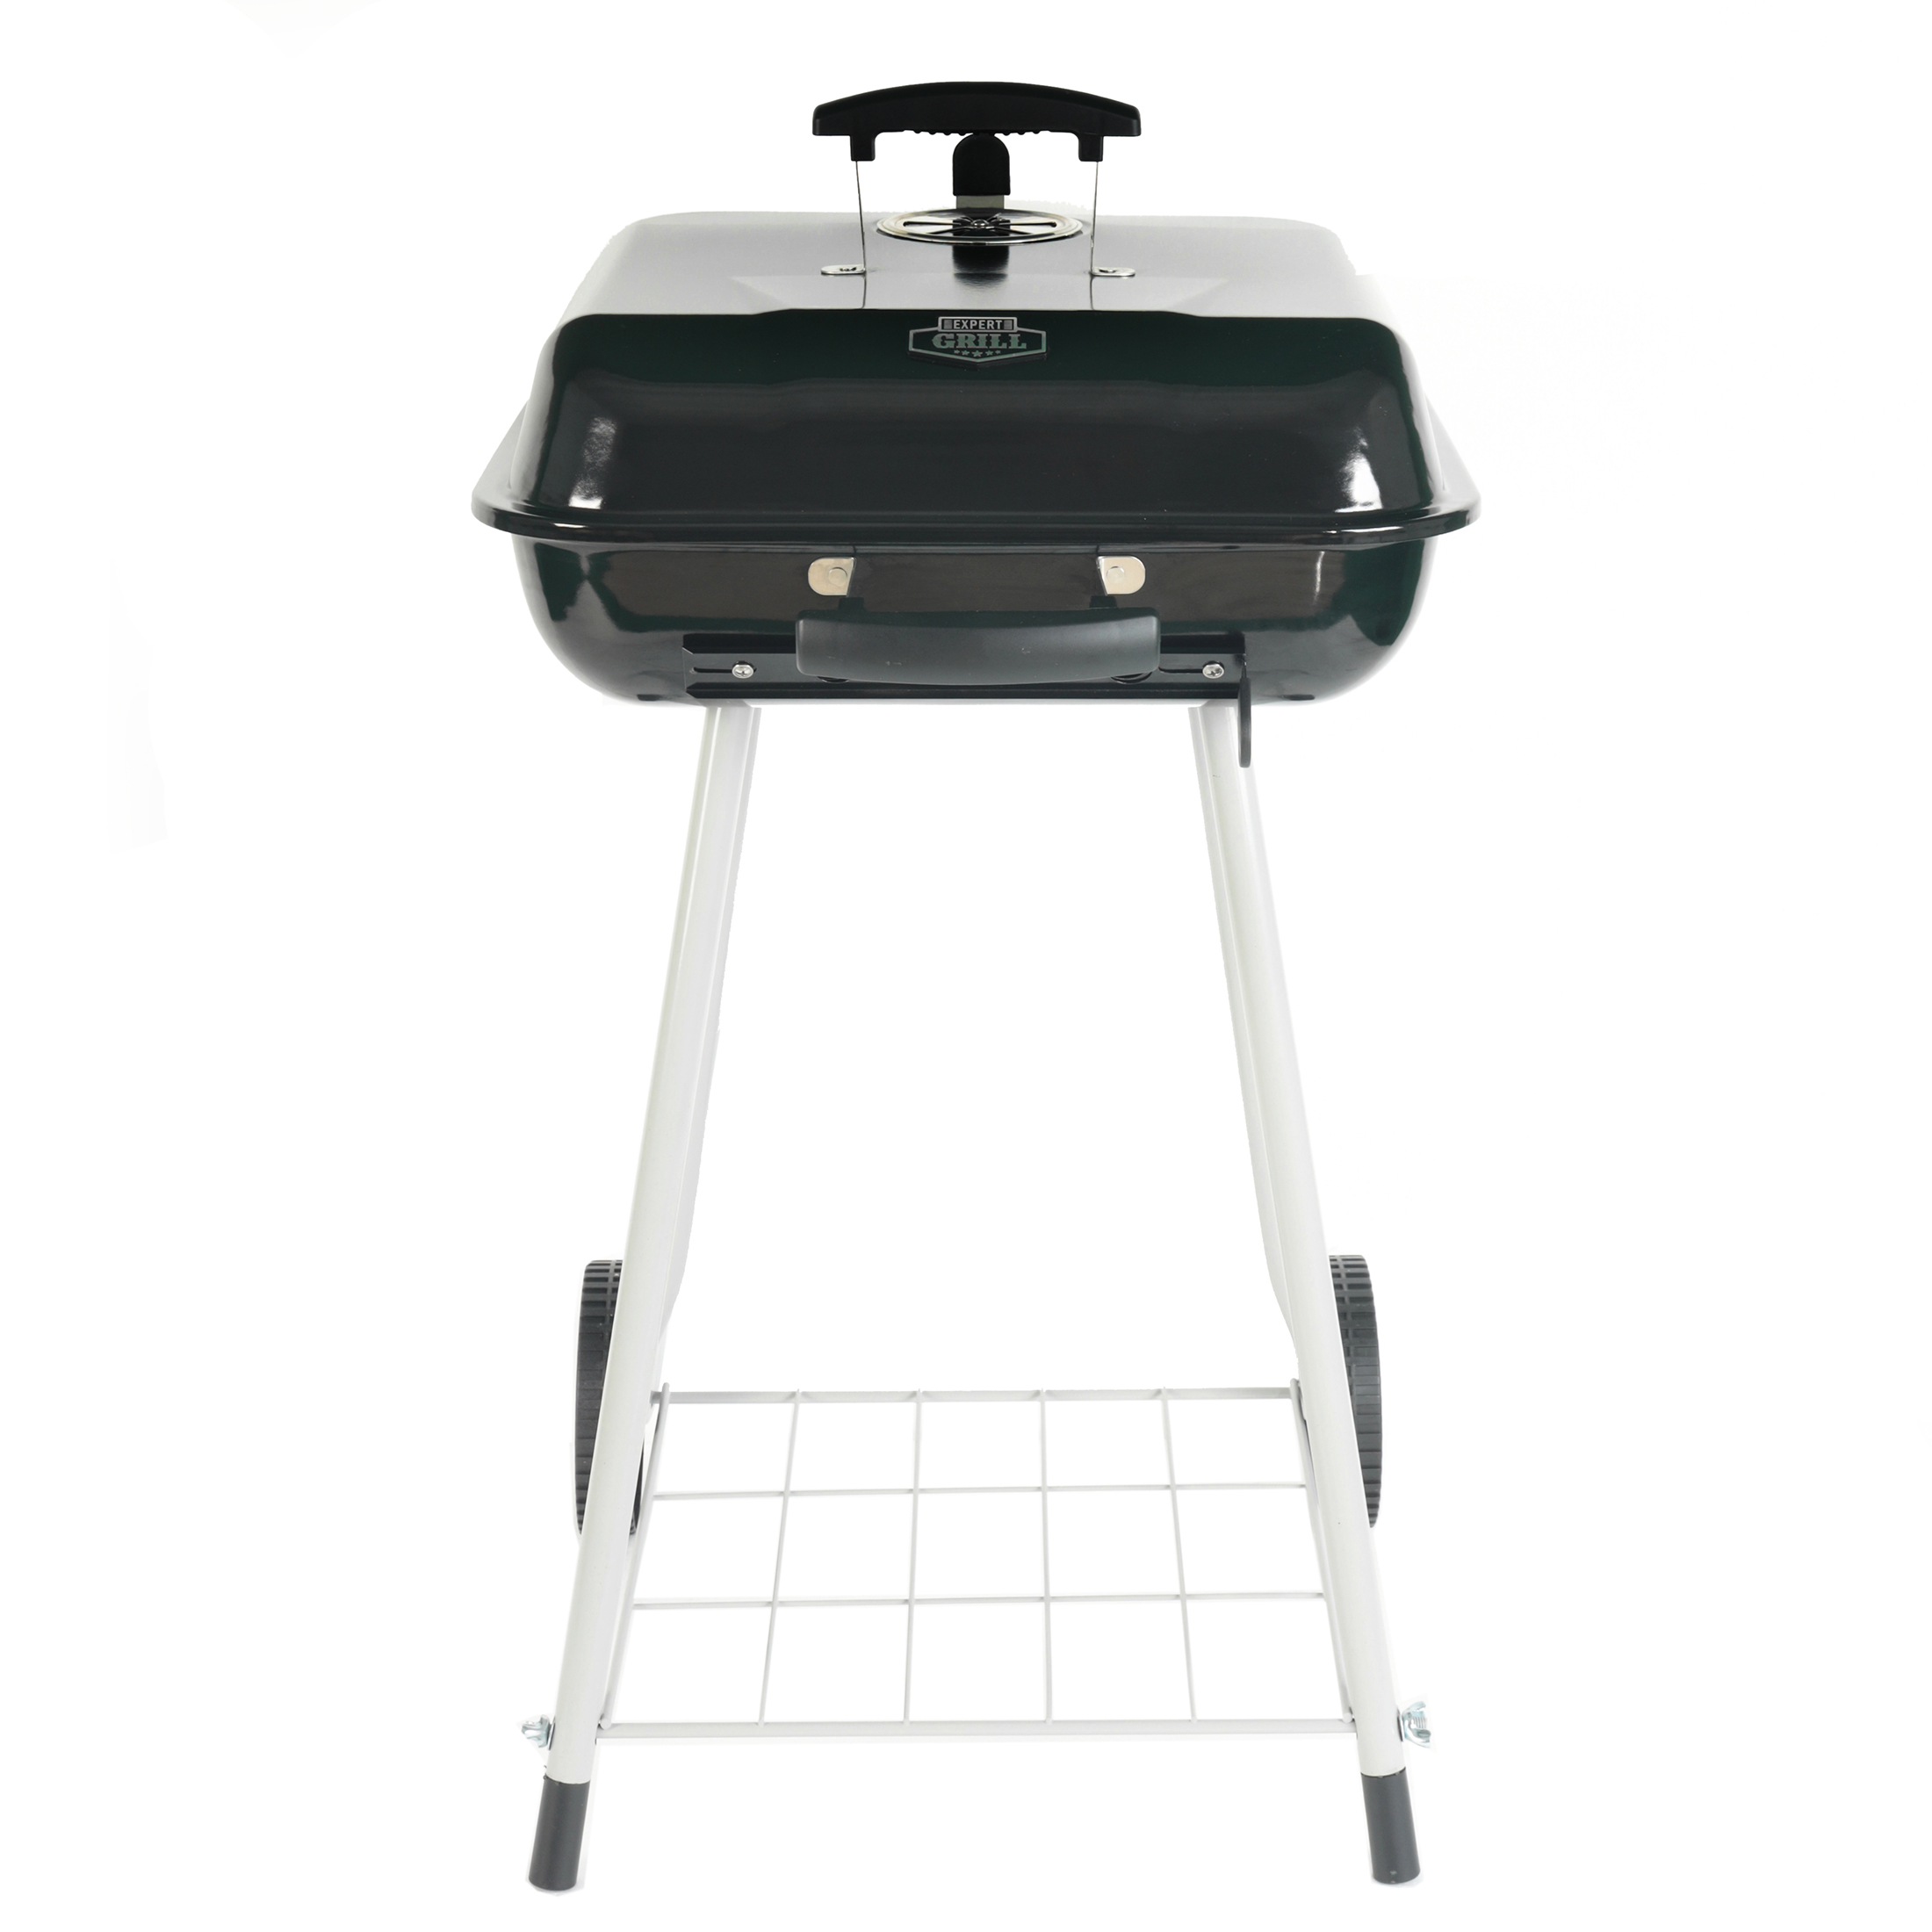 Expert Grill 17.5" Square Steel Charcoal Grill with Wheels, Black - image 1 of 18